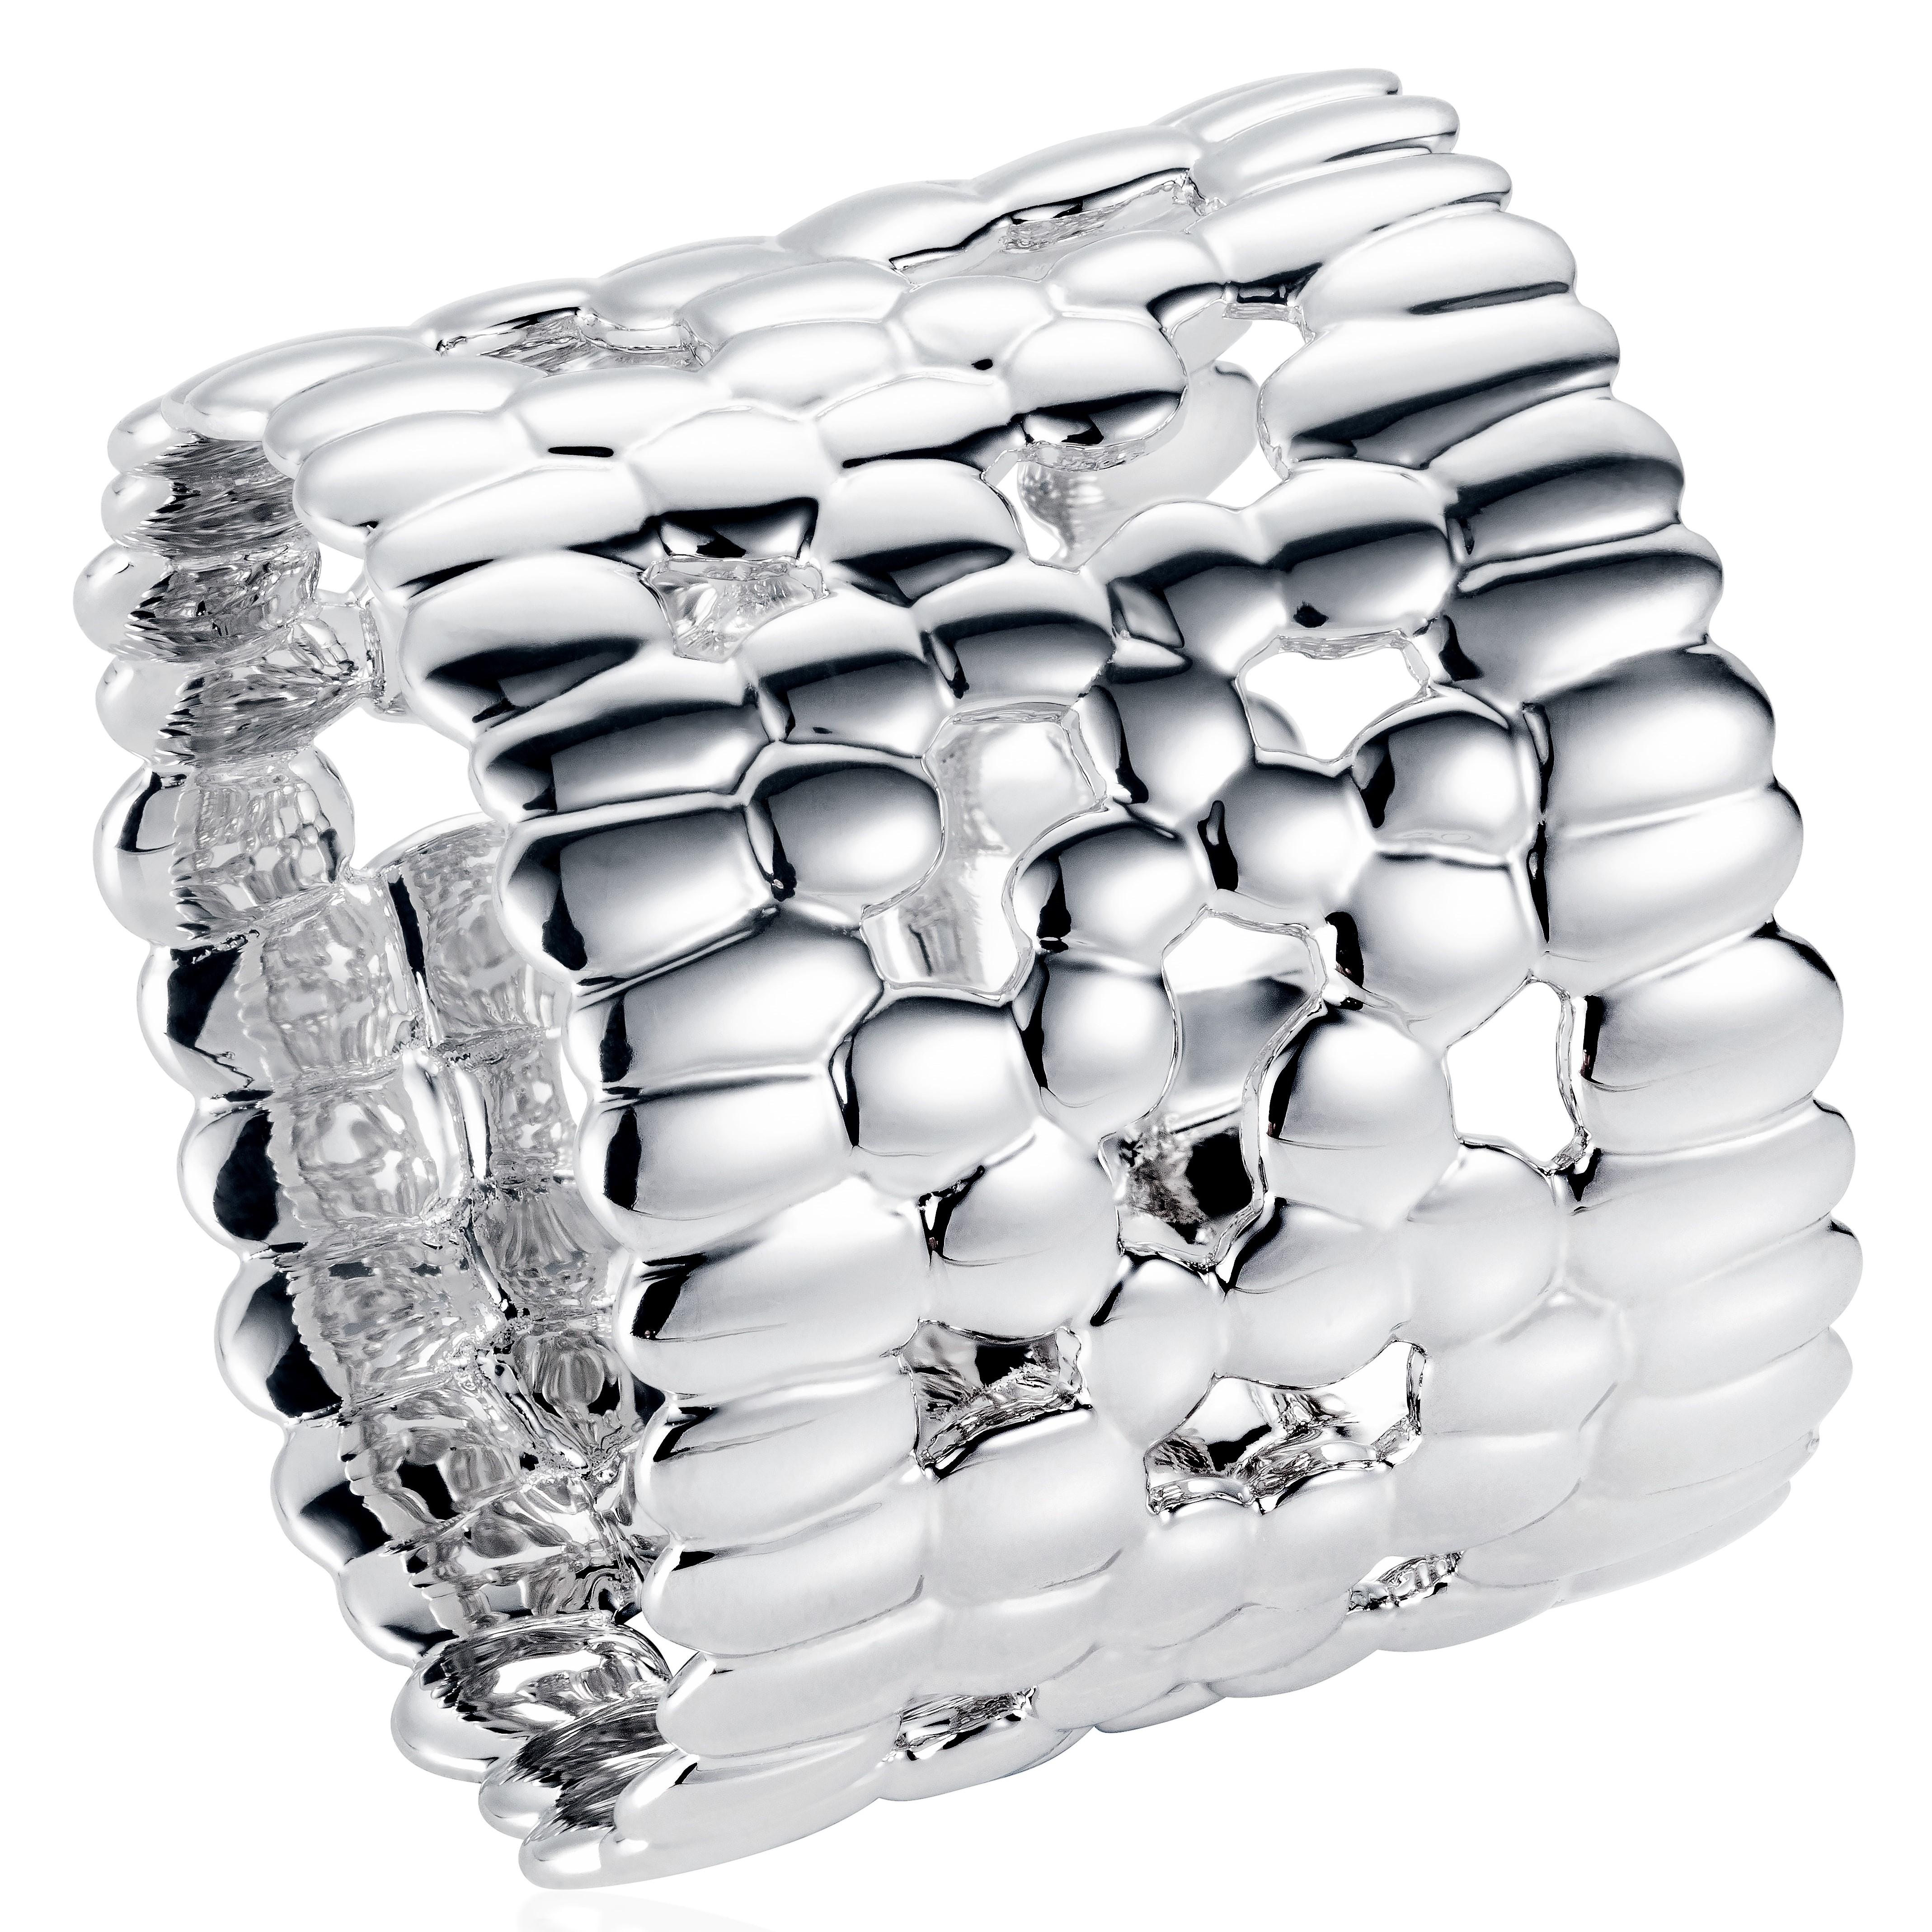 18 Karat White Gold Band Ring

This unisex ring puts a unique spin on the classic white gold ring. It is part of the Skin collection, which is inspired by the designer's mixed heritage. This collection celebrates differences, unifies cultures and